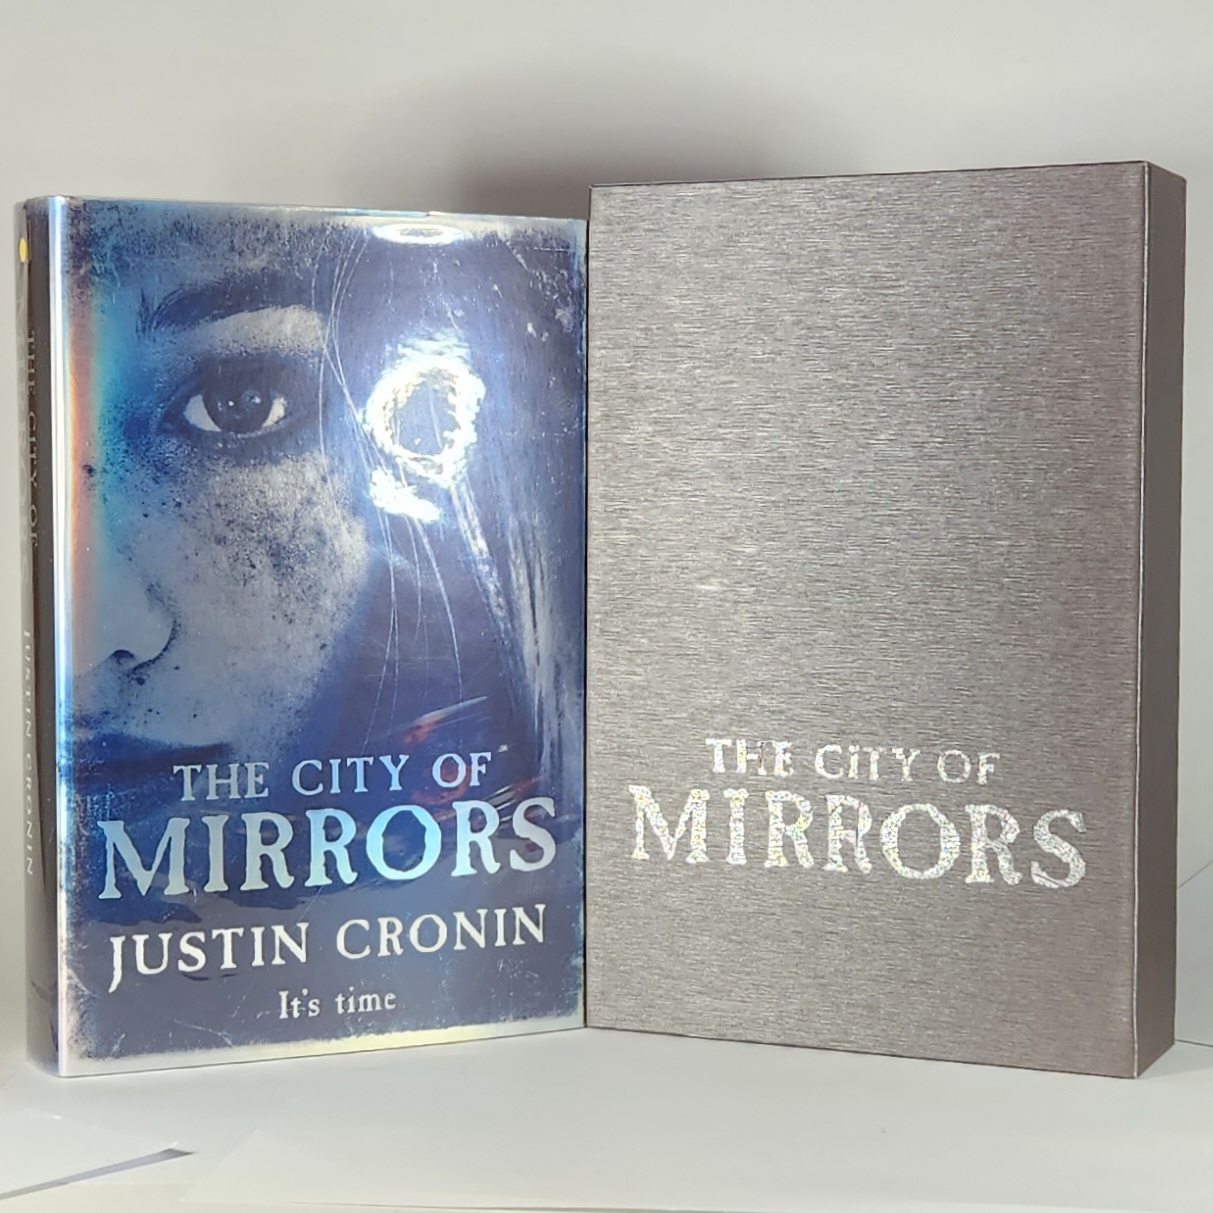 Slipcase design for The City of Mirrors by Justin Cronin.